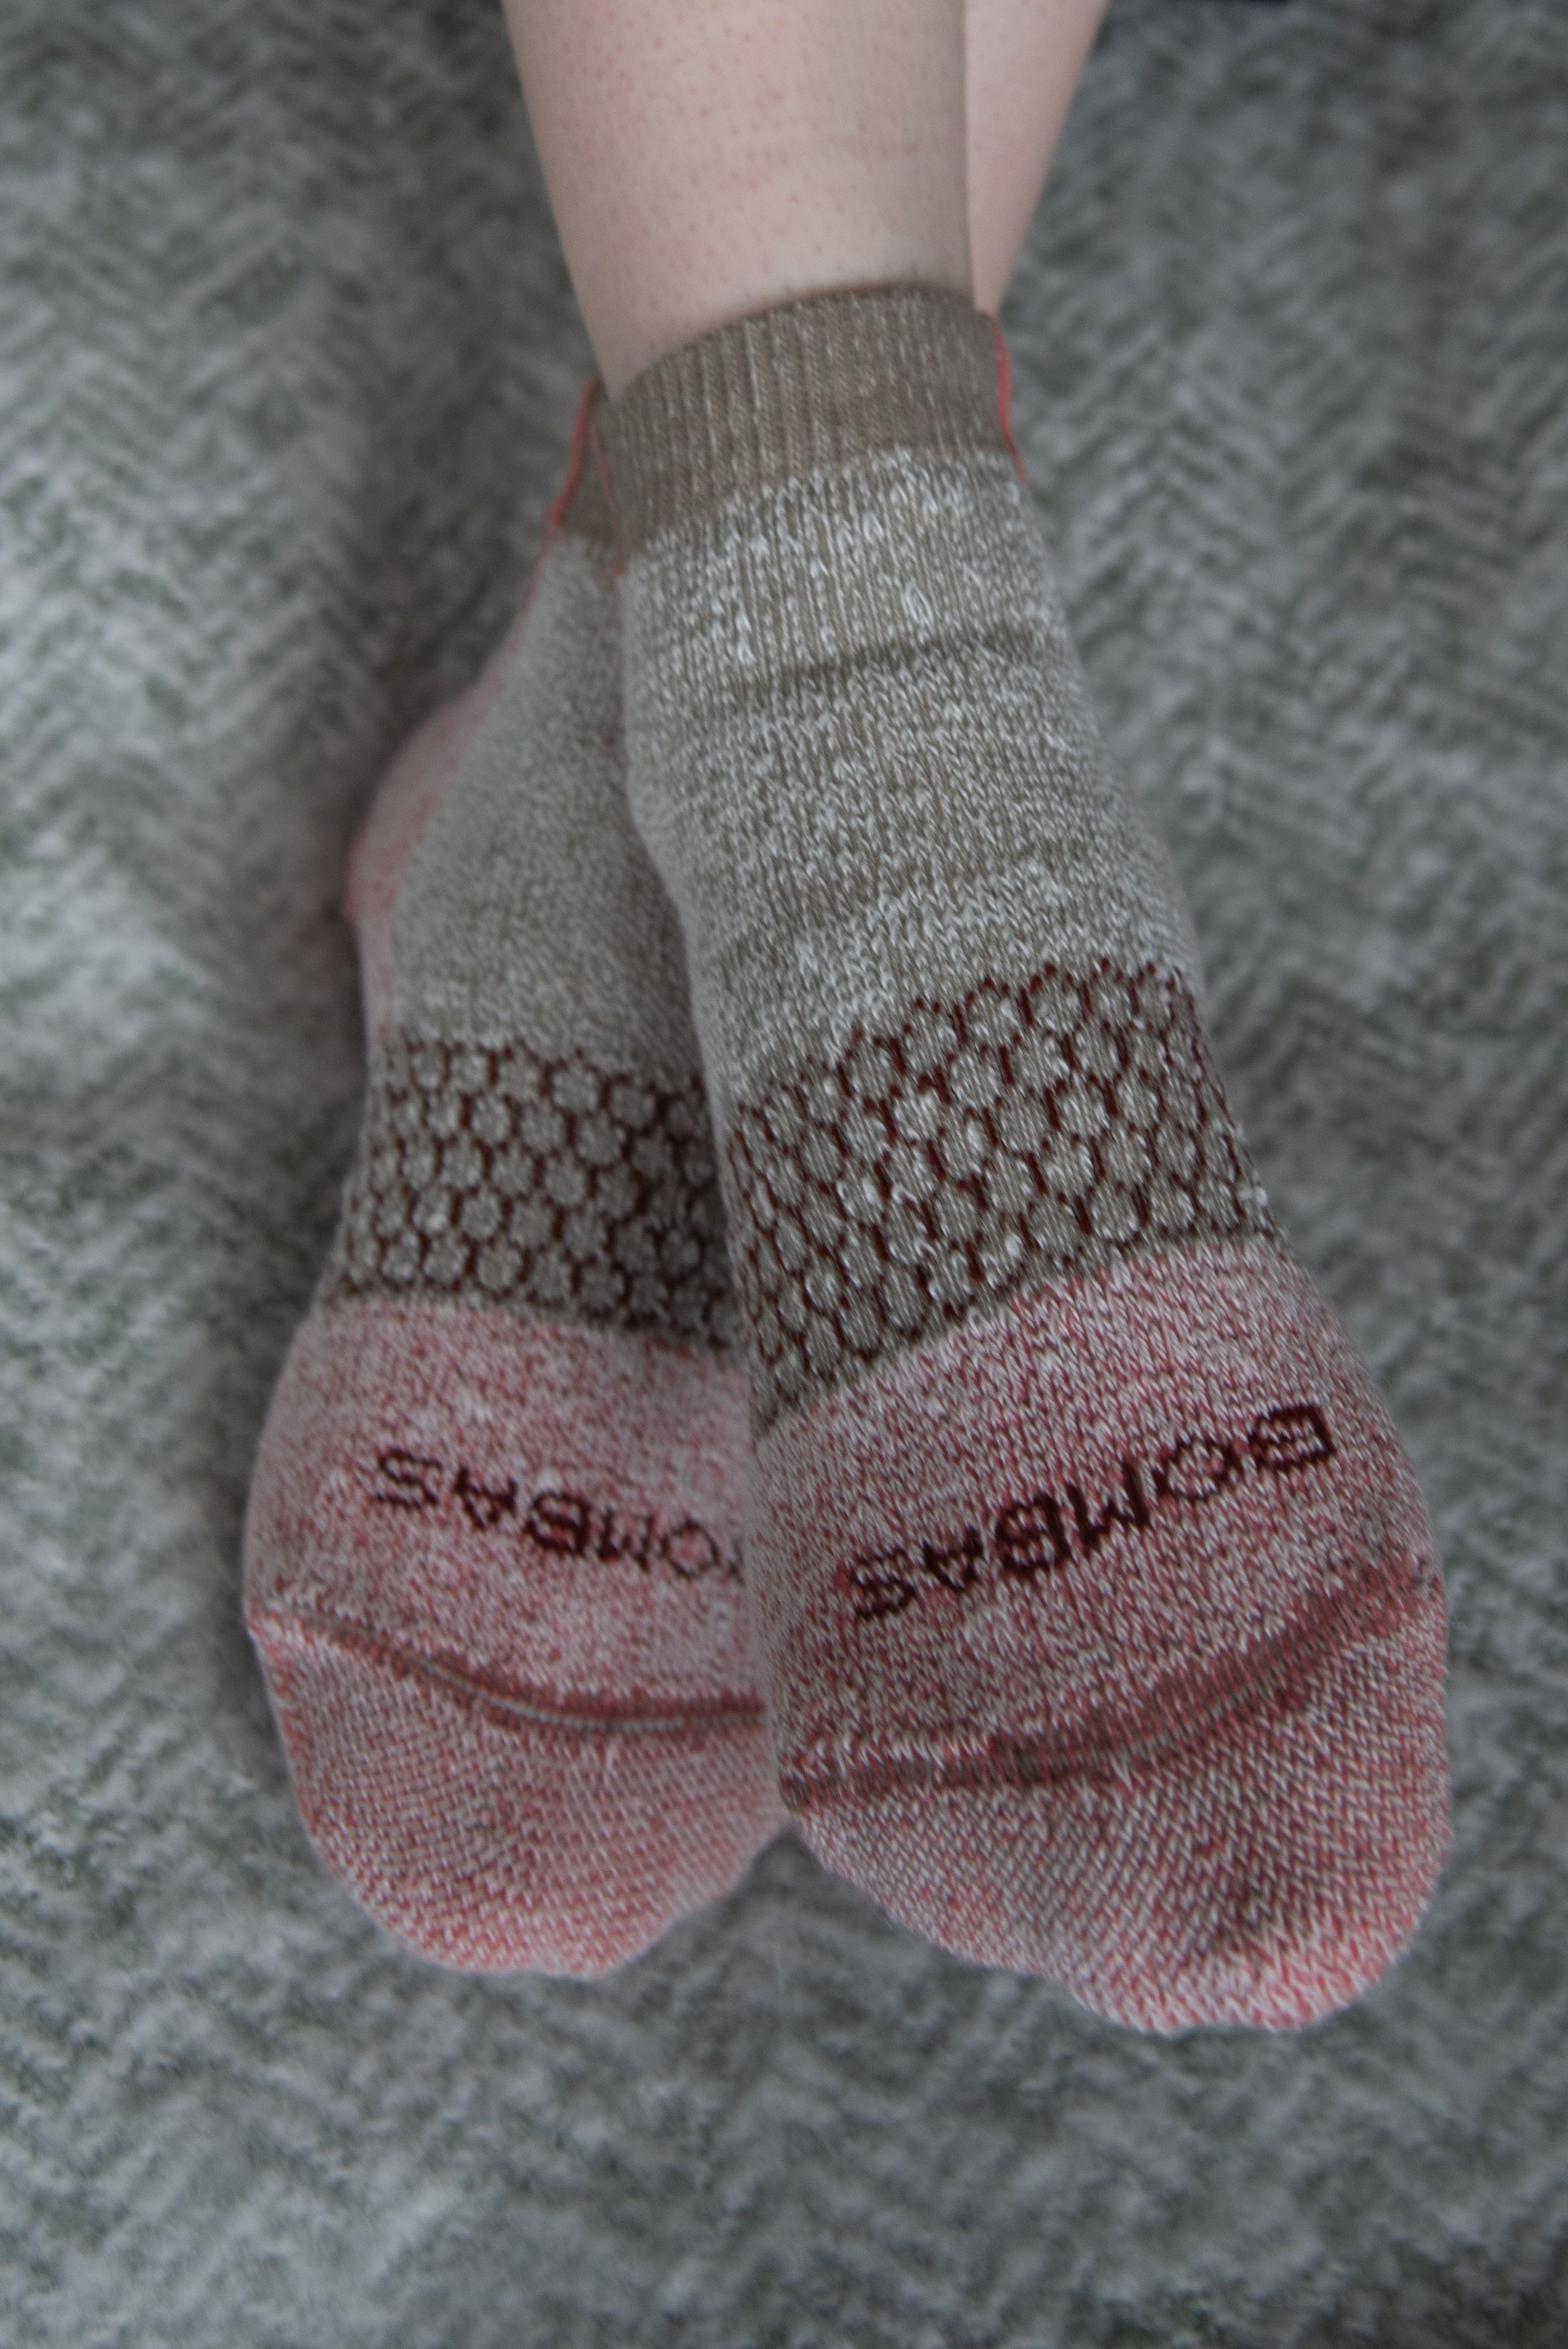 Bombas Socks Review — The Best Socks You Can Buy?